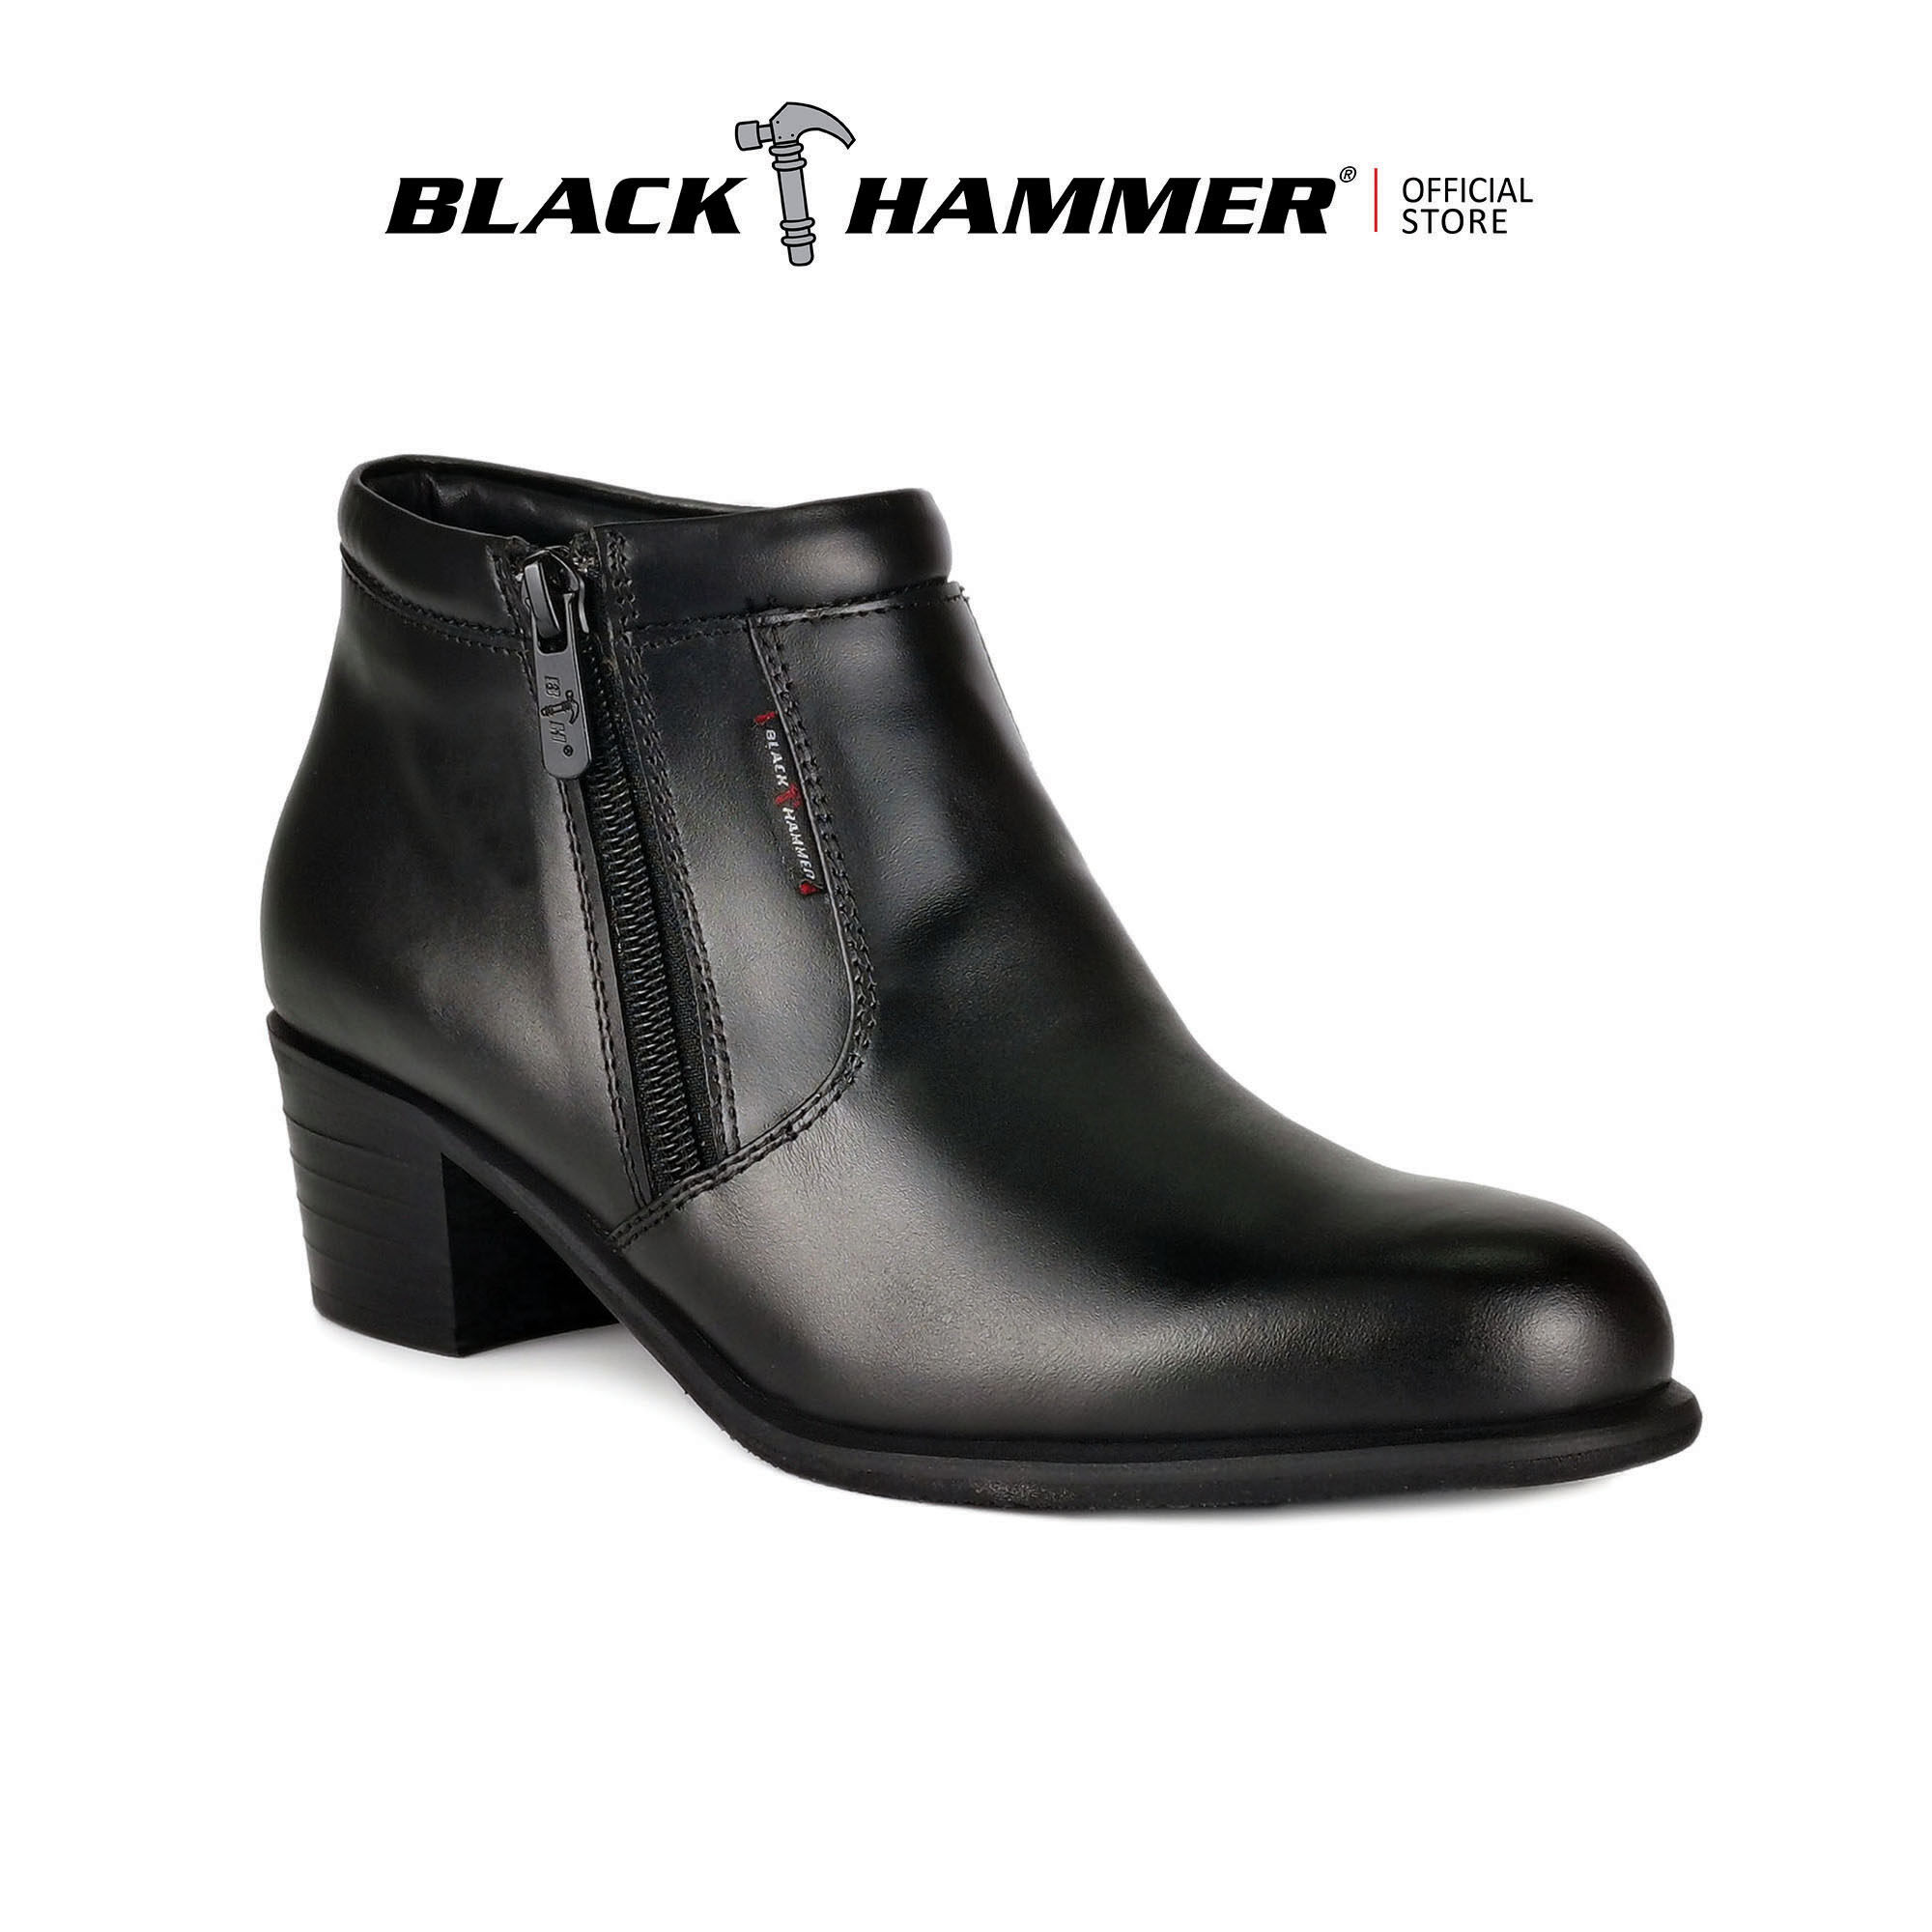 Black Hammer Women Formal Mid Cut with Double Zip Shoes 